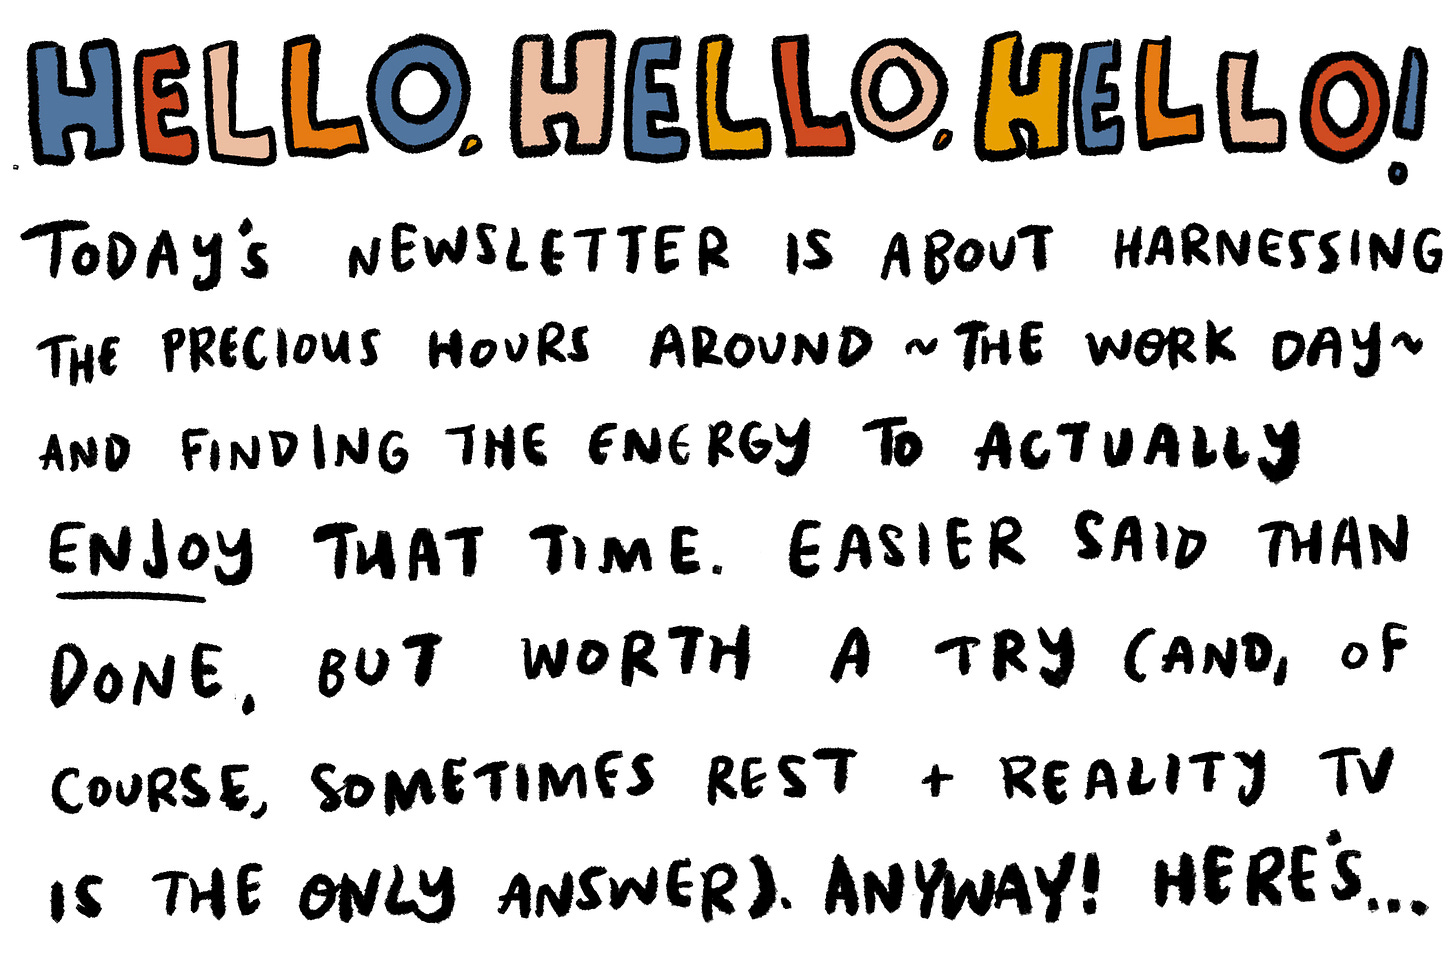 Hello, hello, hello! Today's newsletter is about harnessing the precious hours around the work day and finding the energy to actually enjoy that time. Easier said than done, but worth a try (and, of course, sometimes rest + reality tv is the only answer!). Here's...